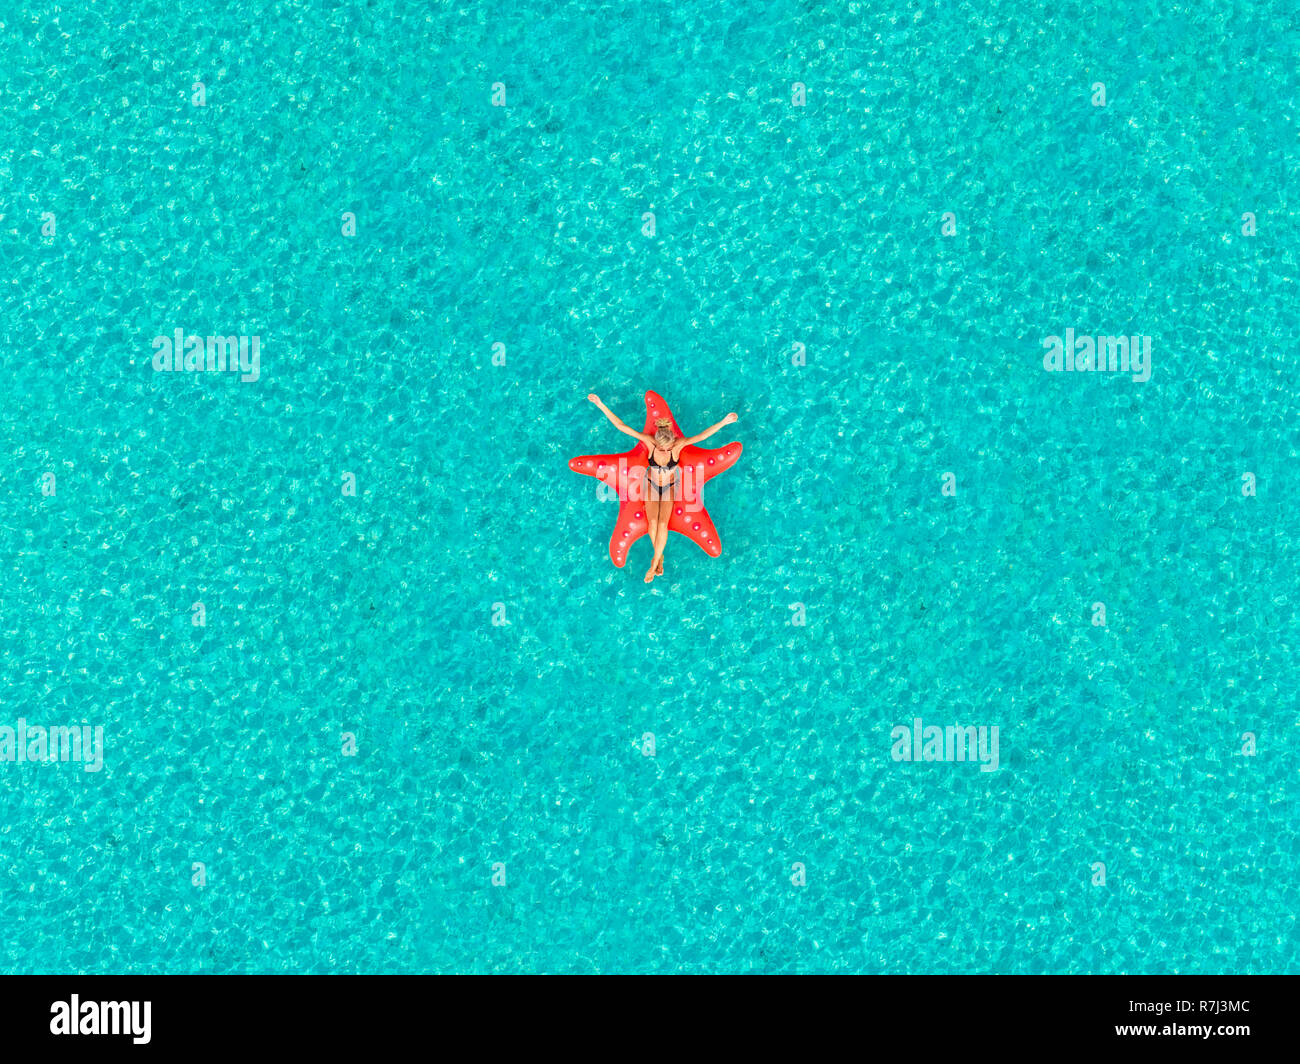 Aerial view of woman floating on inflatable star shaped mattress with arms up in the air on transparent sea. Stock Photo